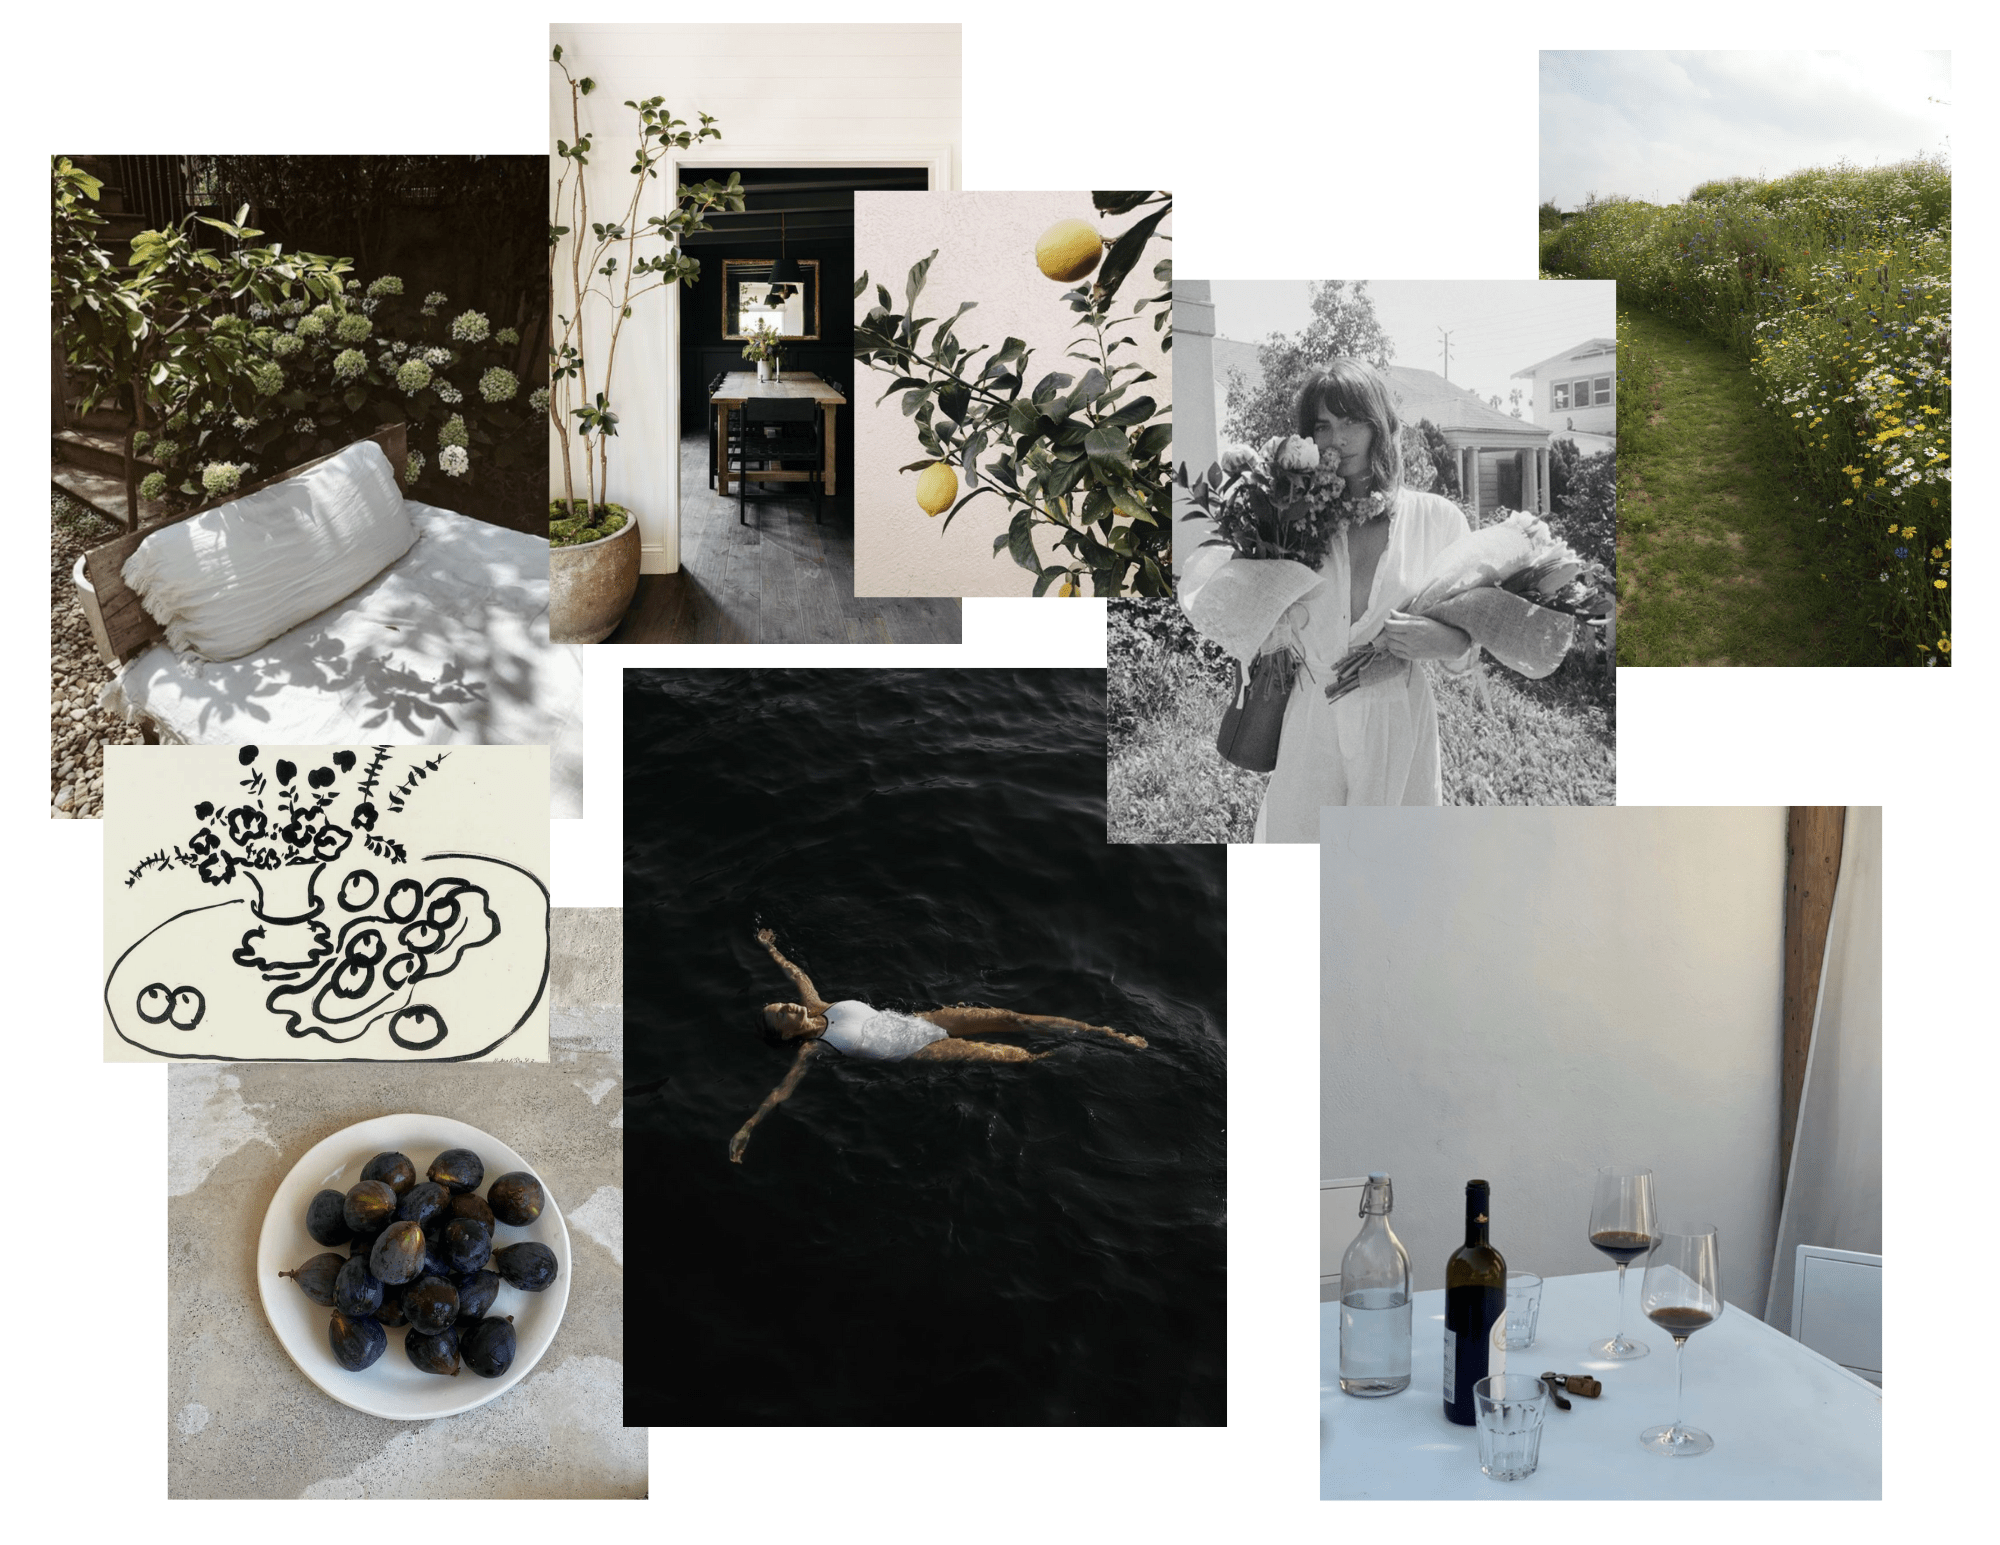 collage of summer inspiration denoting a mood of summer, including a woman swimming in the ocean, a bowl of figs, a woman holding flowers, a couch in the sun, a branch of lemons and a table with wine classes